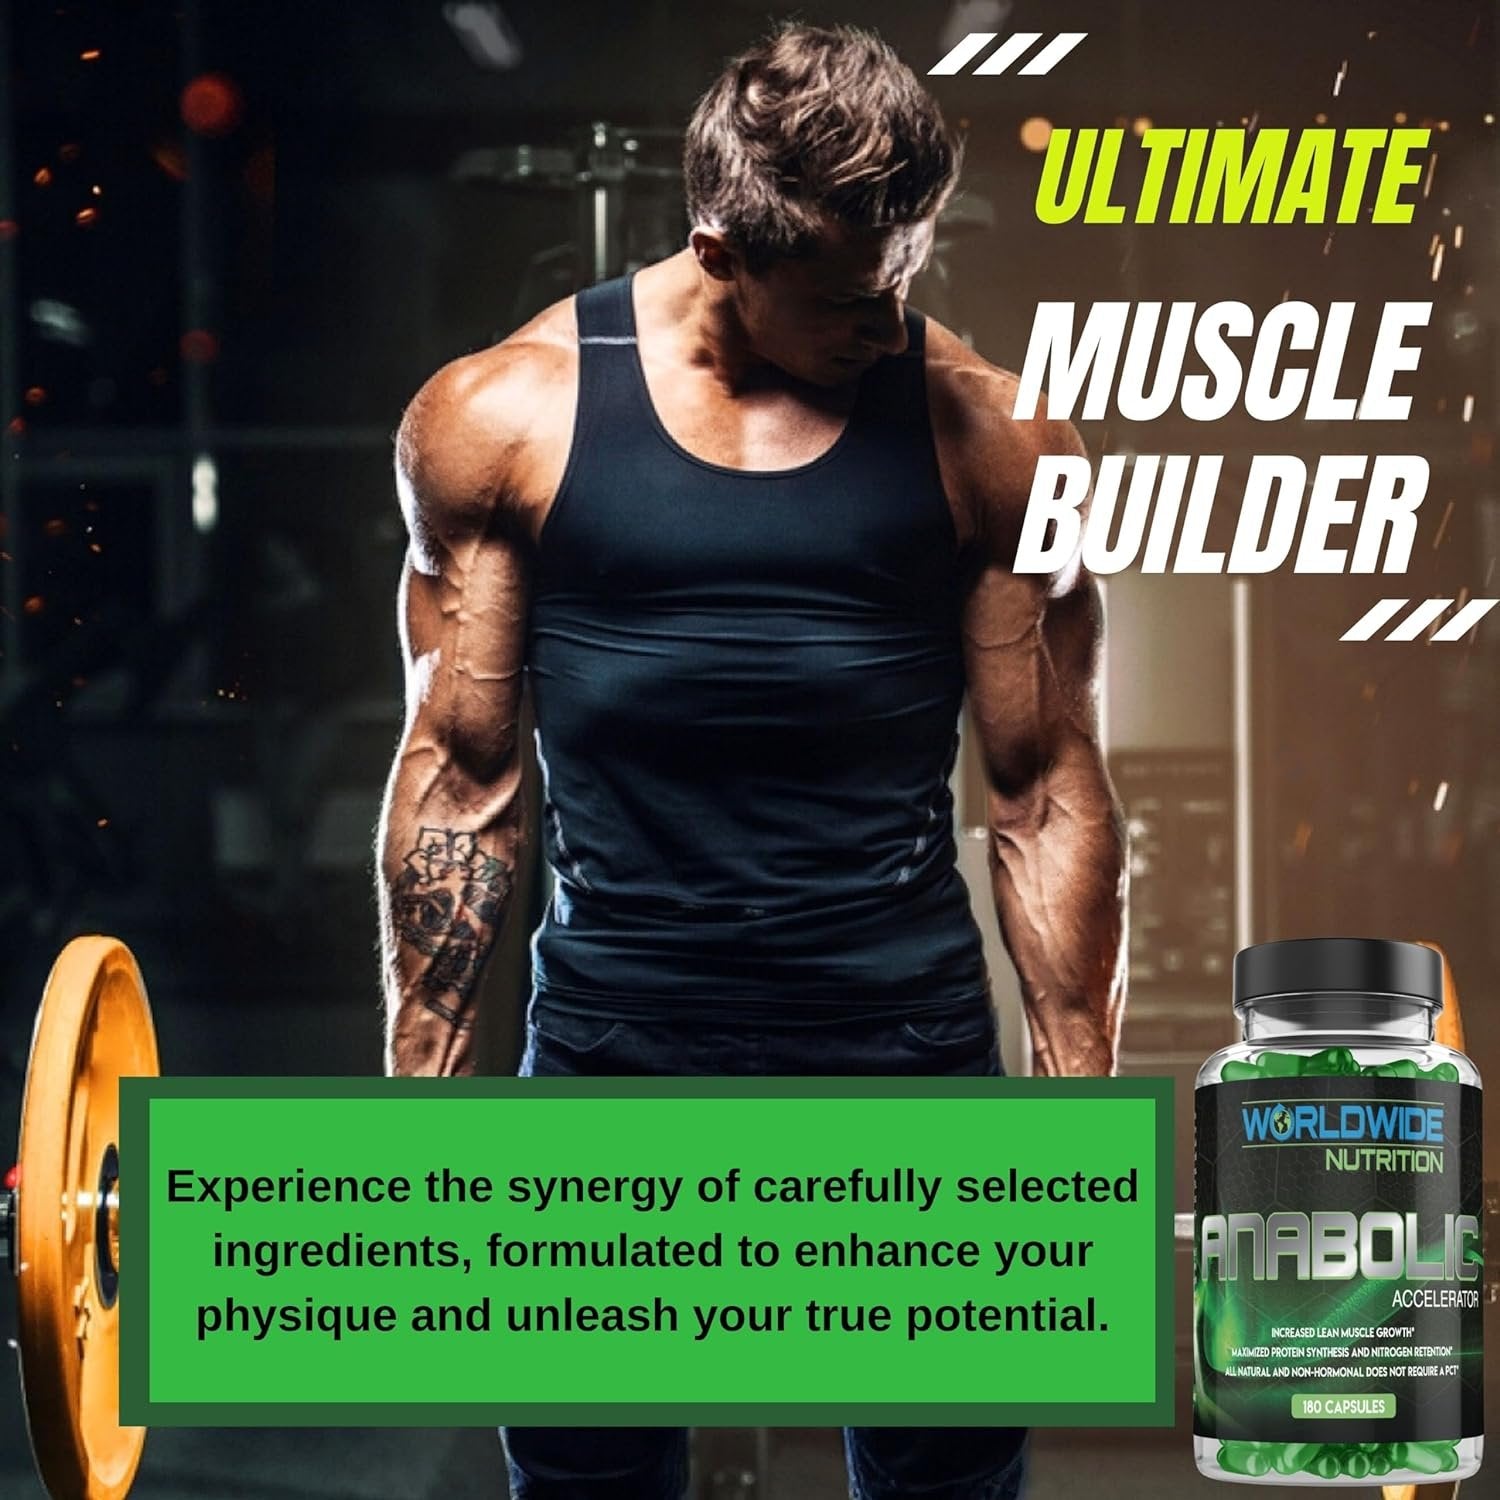 Worldwide Nutrition Anabolic Accelerator Vitamin Supplement - Ignite Your Growth, Strength & Energy Journey - Muscle Builder & Cortisol Blocker for Men - 180 Count Supplements for Men